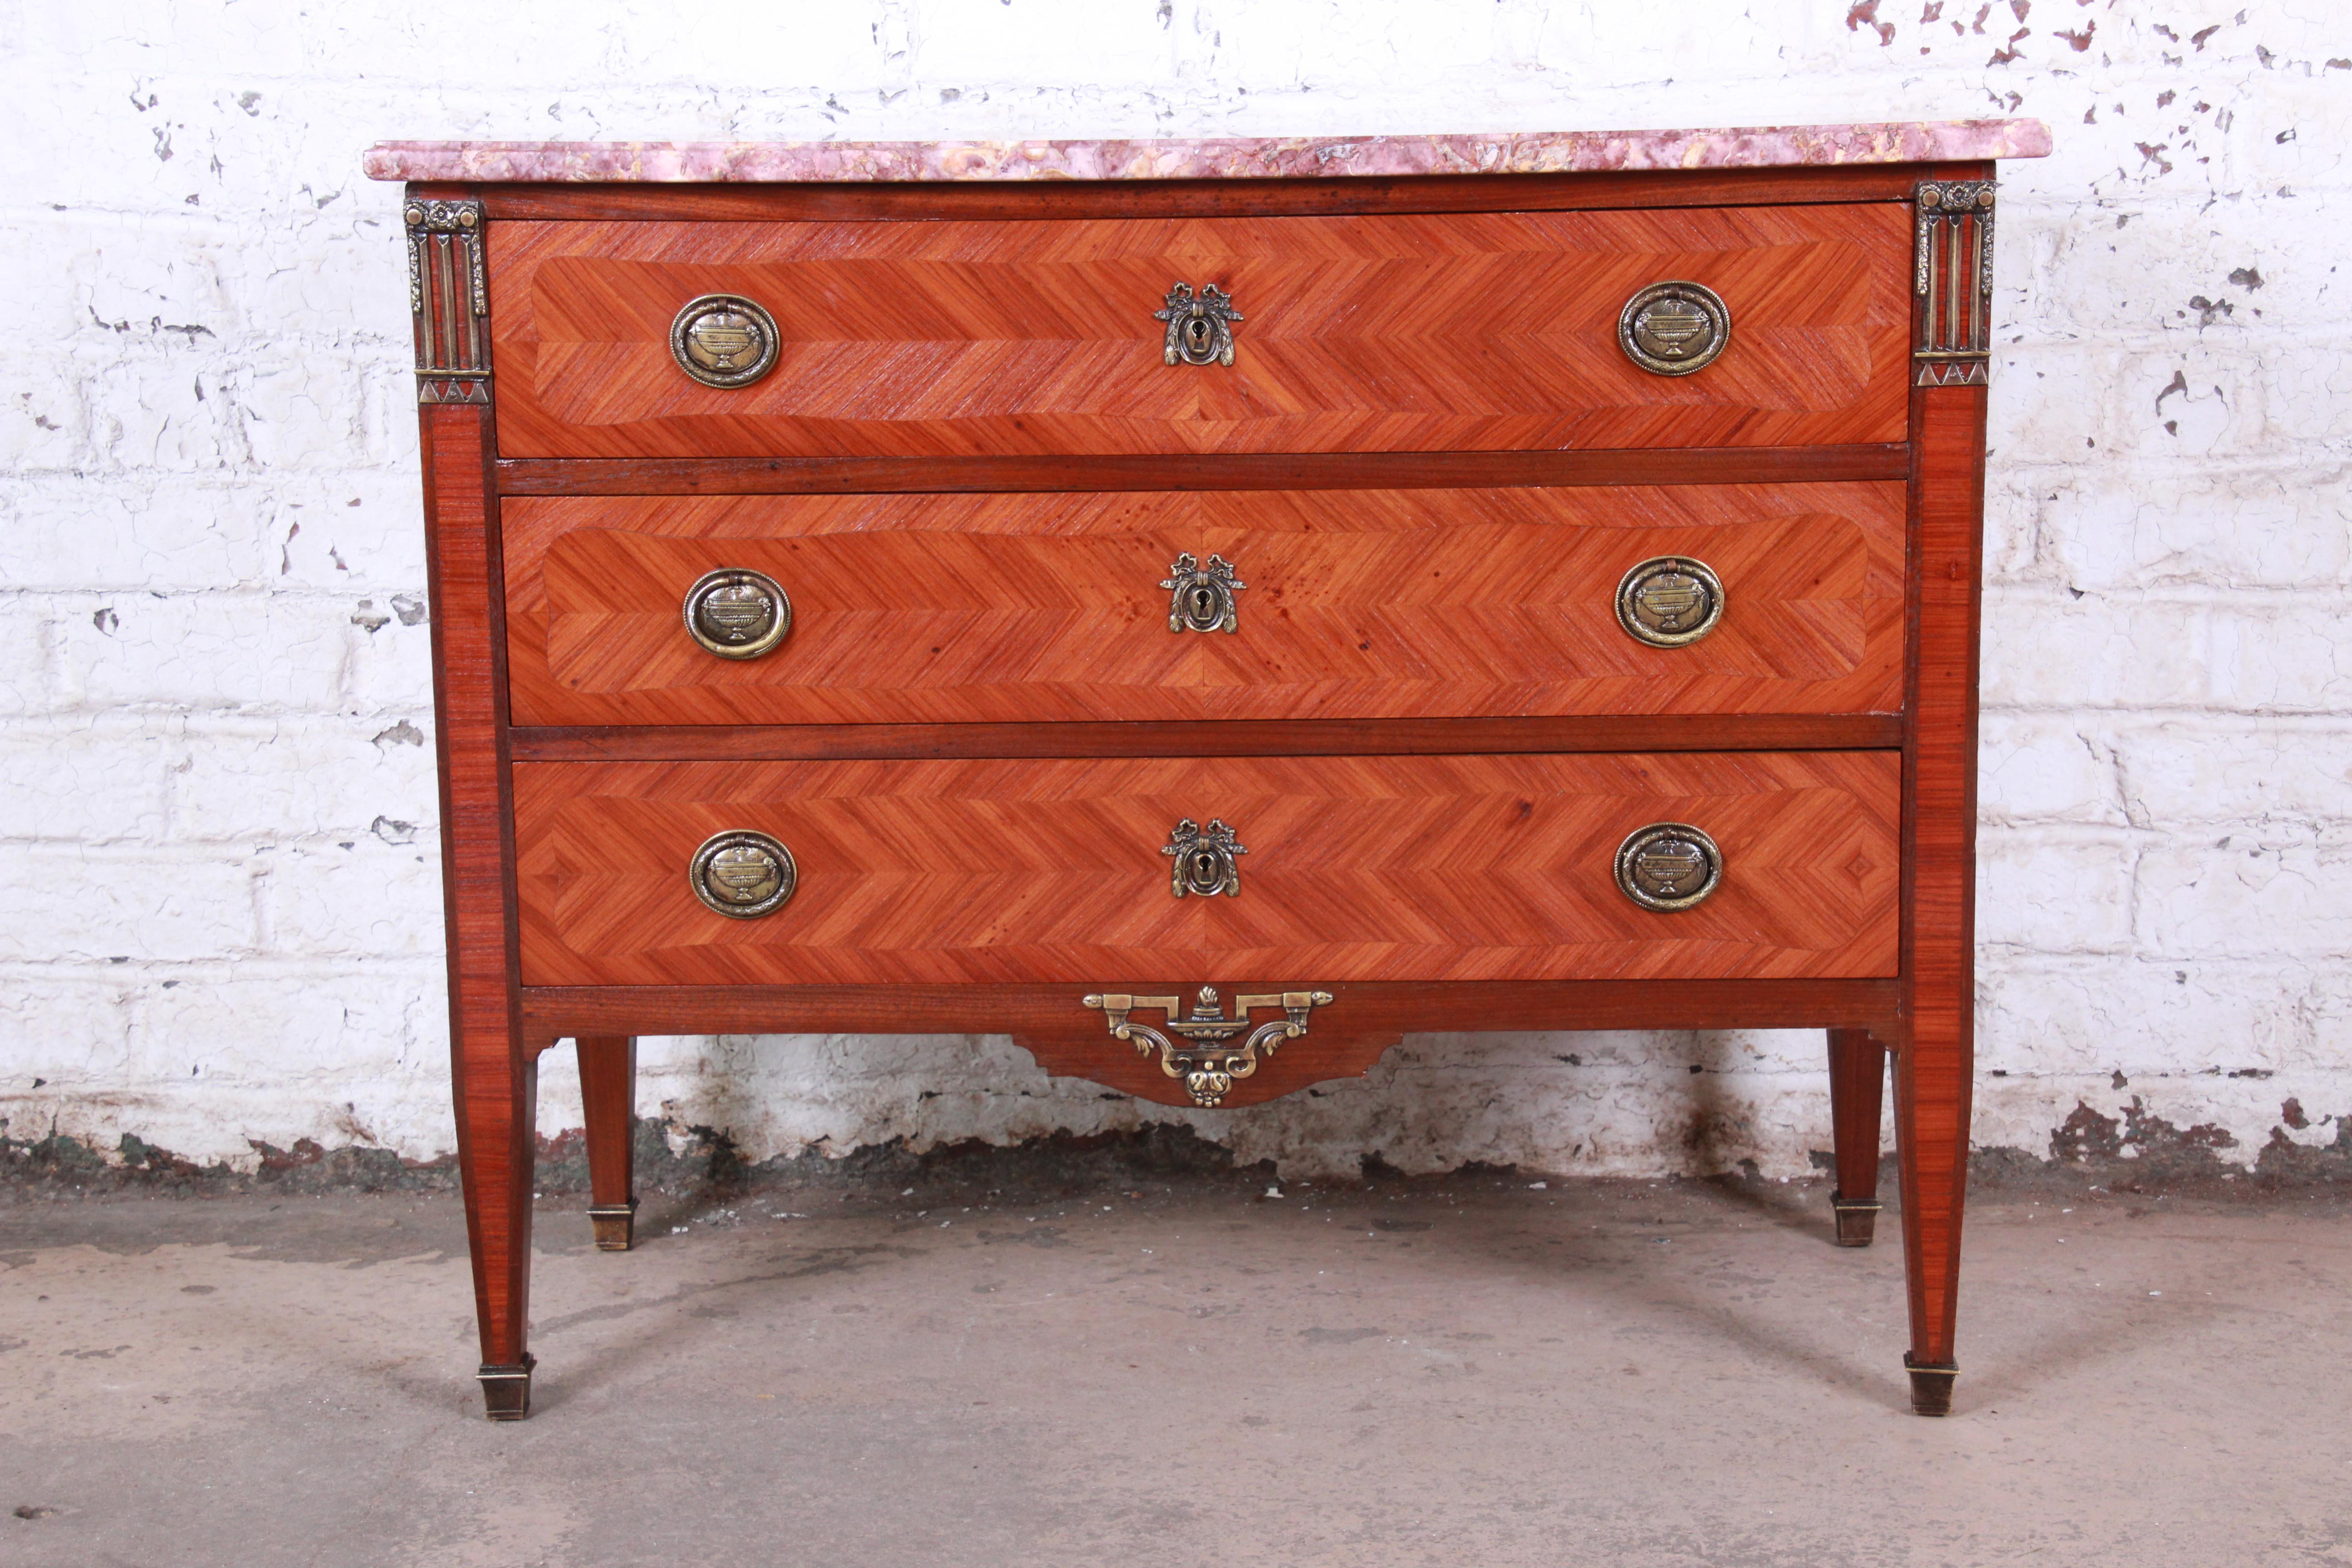 An exceptional antique Louis XV style mahogany chest of drawers or commode. The chest features gorgeous mahogany wood grain, with inlaid parquetry and bronze mounted ormolu. The fuchsia and tan beveled marble top shows incredible veining. The